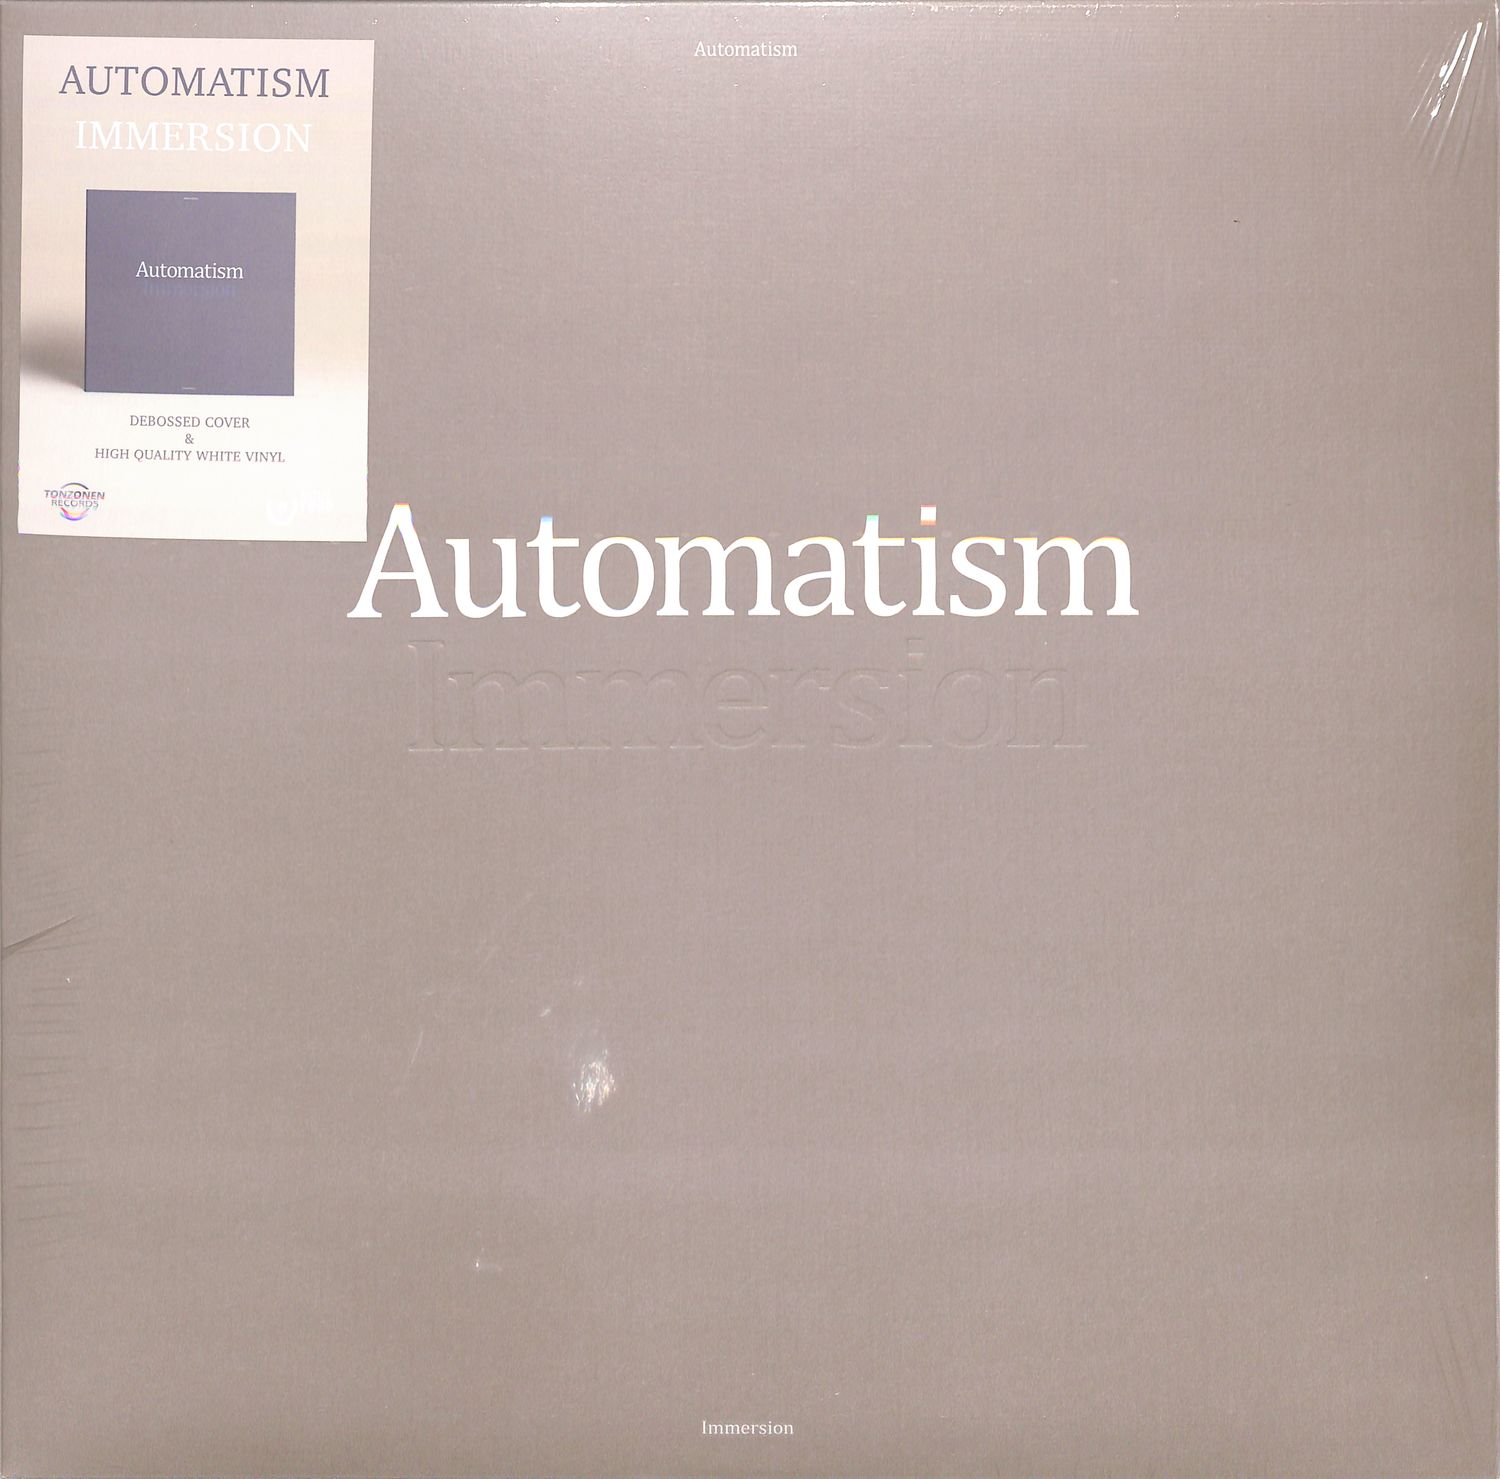 Automatism - IMMERSION 